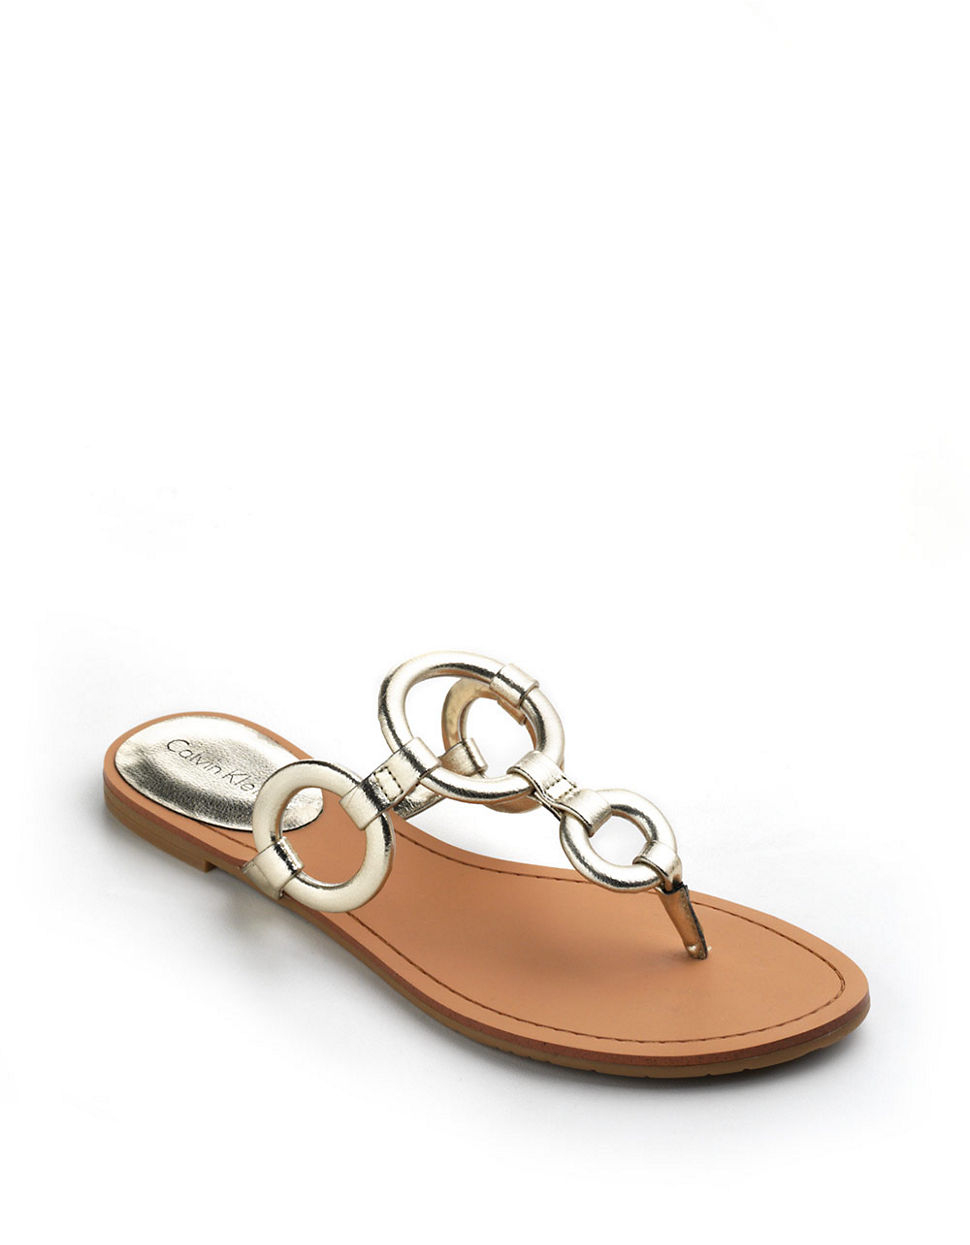 Calvin Klein Jacky Leather Sandals in Gray (gold leather) | Lyst